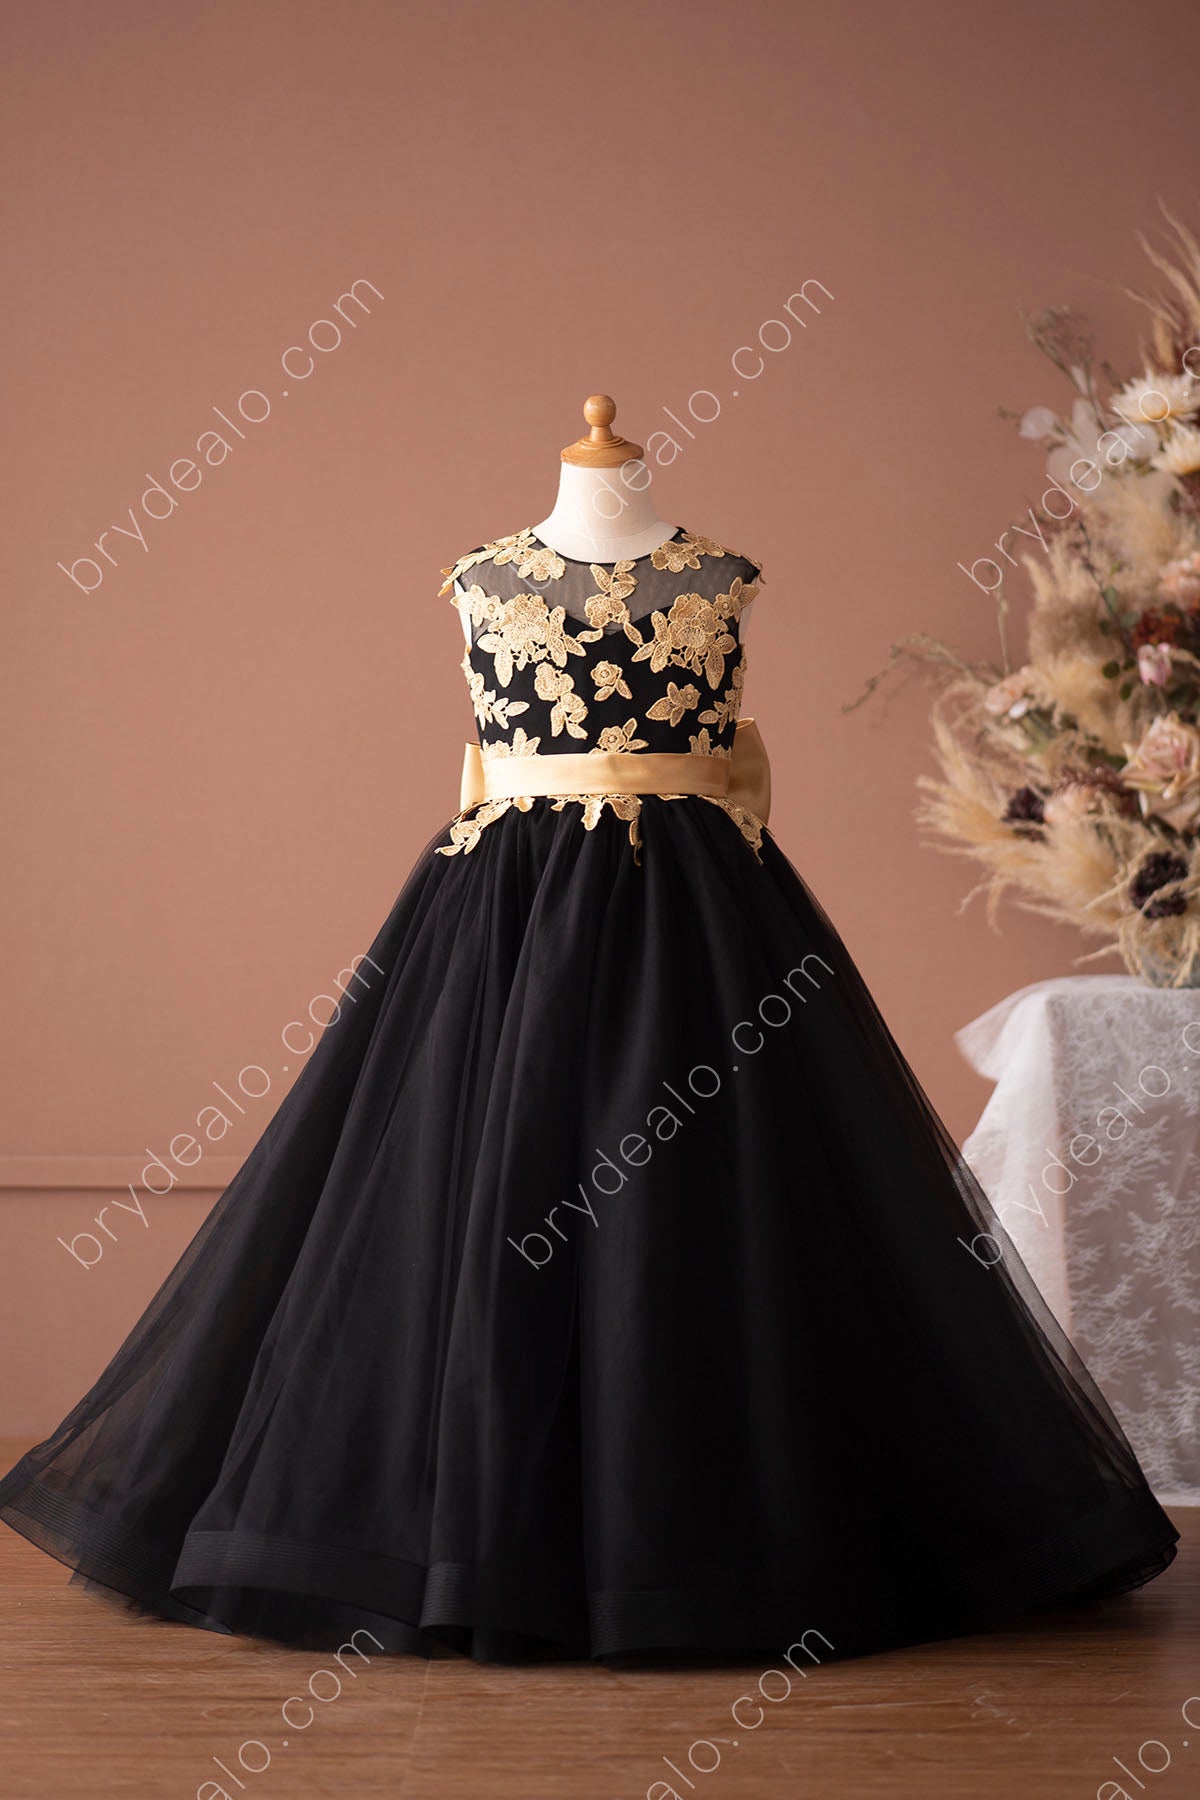 Black Flower Girl Dress with Gold Bowknot